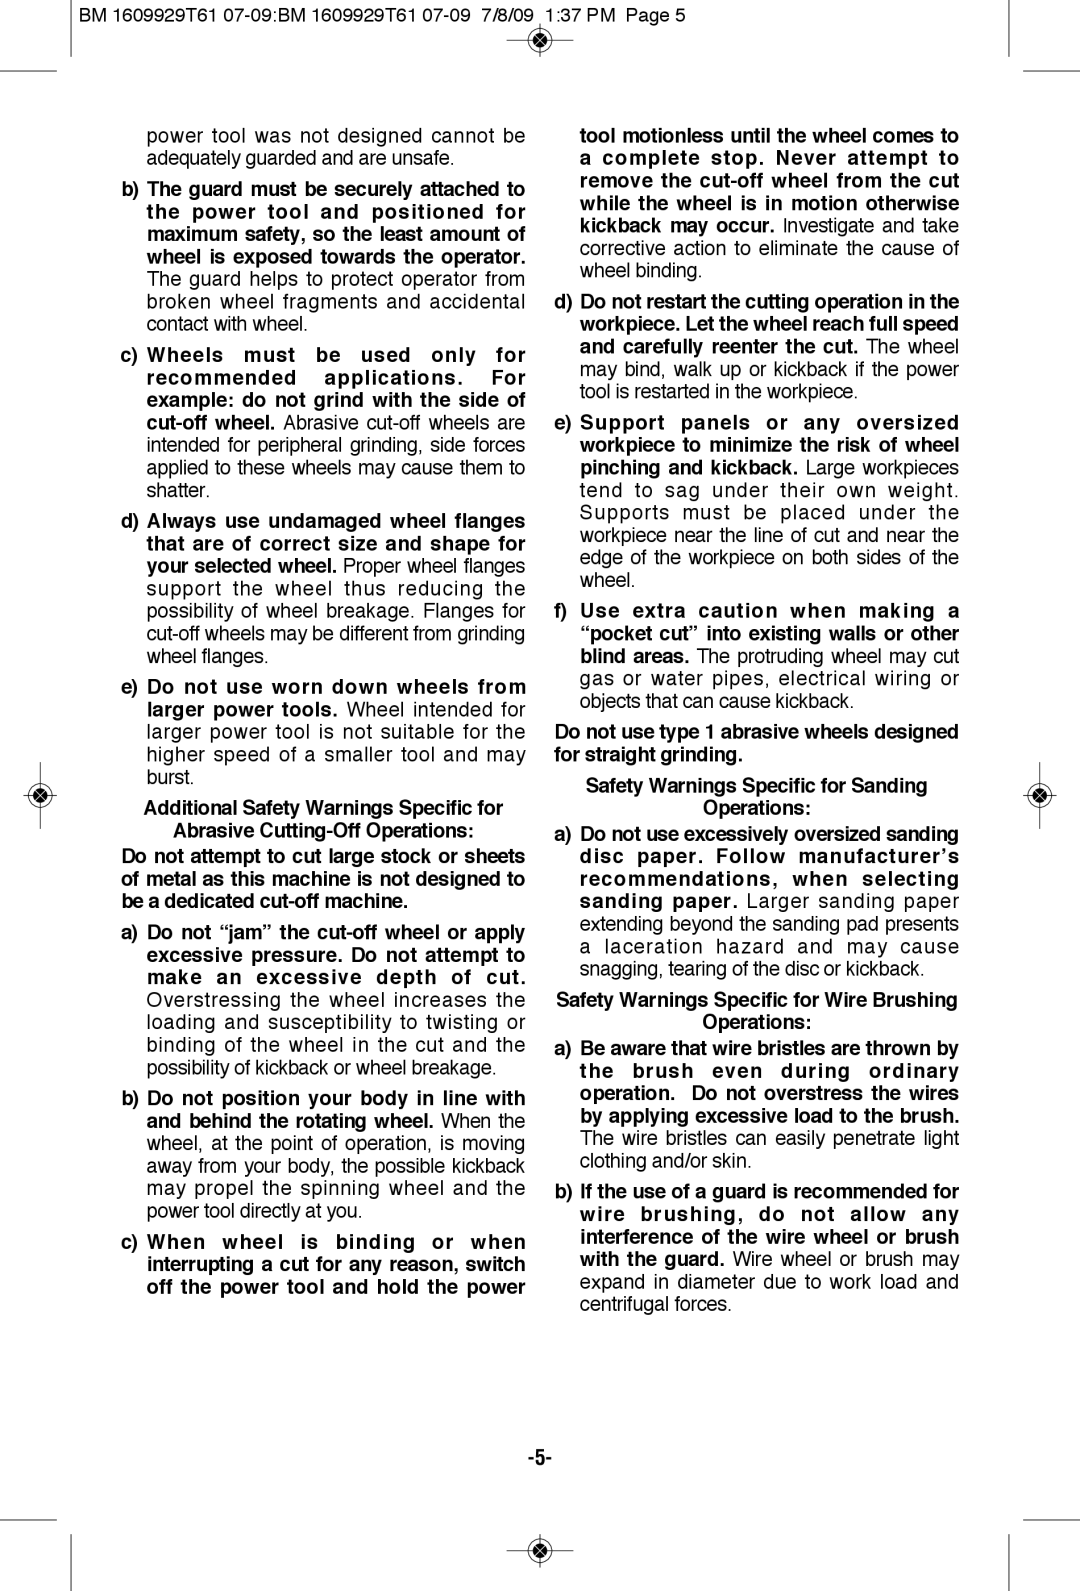 Bosch Power Tools 1974-8, 1994-6 Additional Safety Warnings Specific for, Safety Warnings Specific for Sanding Operations 